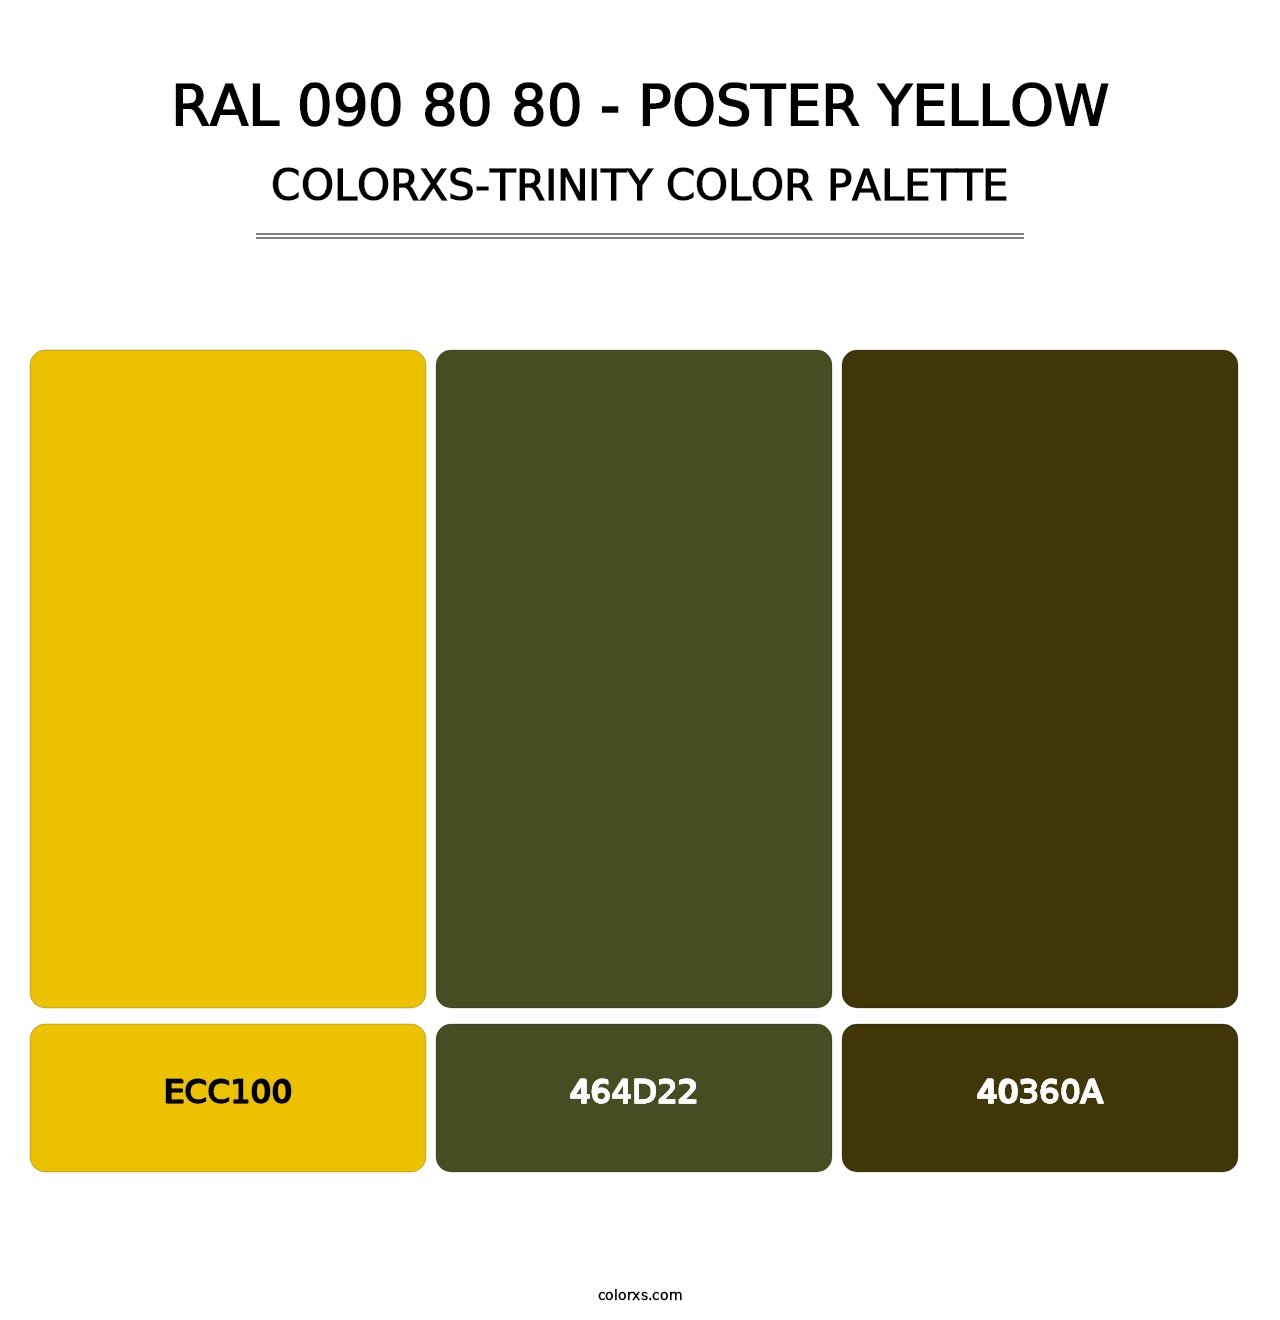 RAL 090 80 80 - Poster Yellow - Colorxs Trinity Palette